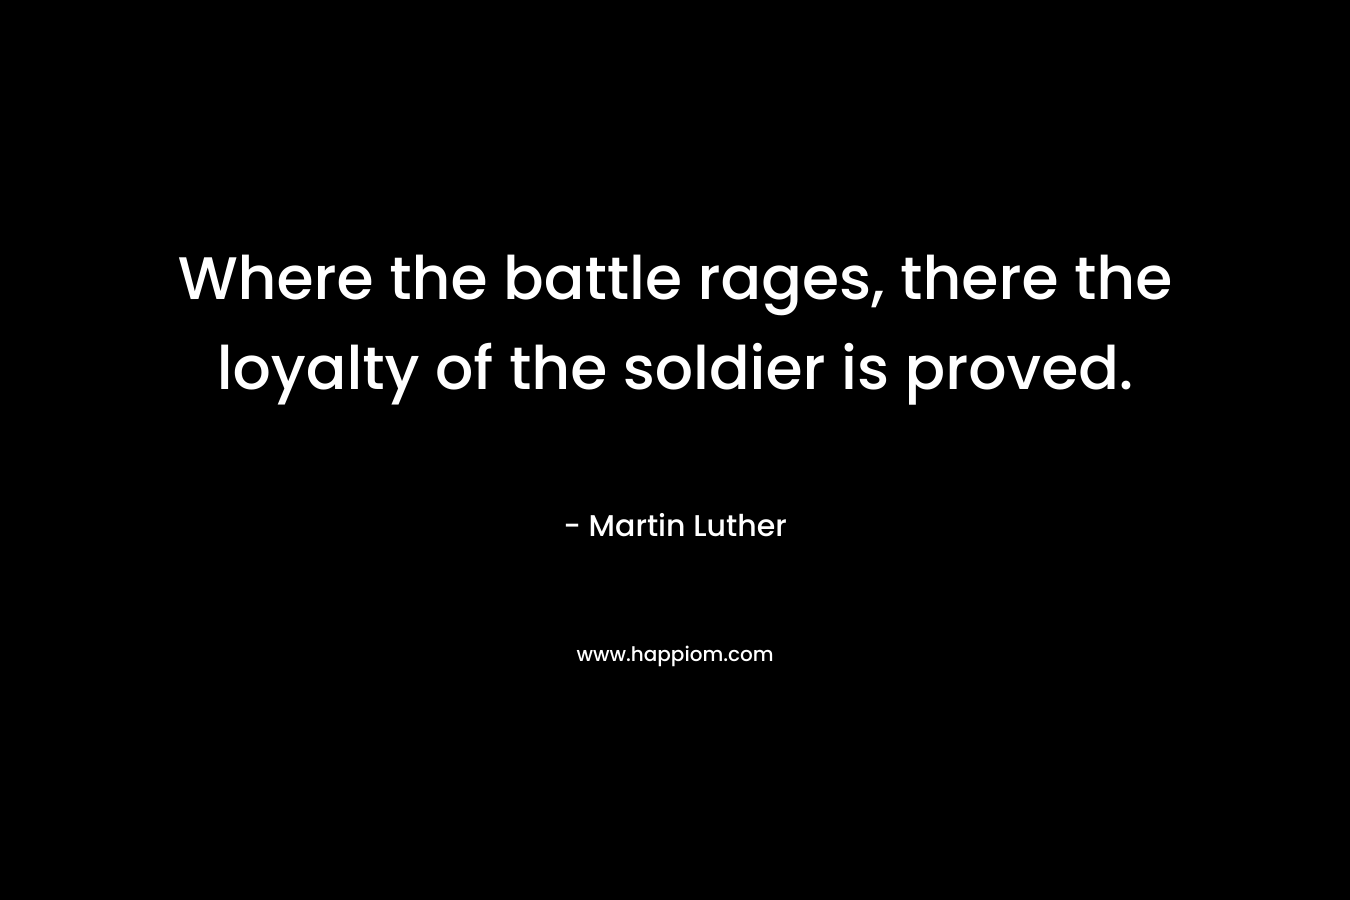 Where the battle rages, there the loyalty of the soldier is proved. – Martin Luther